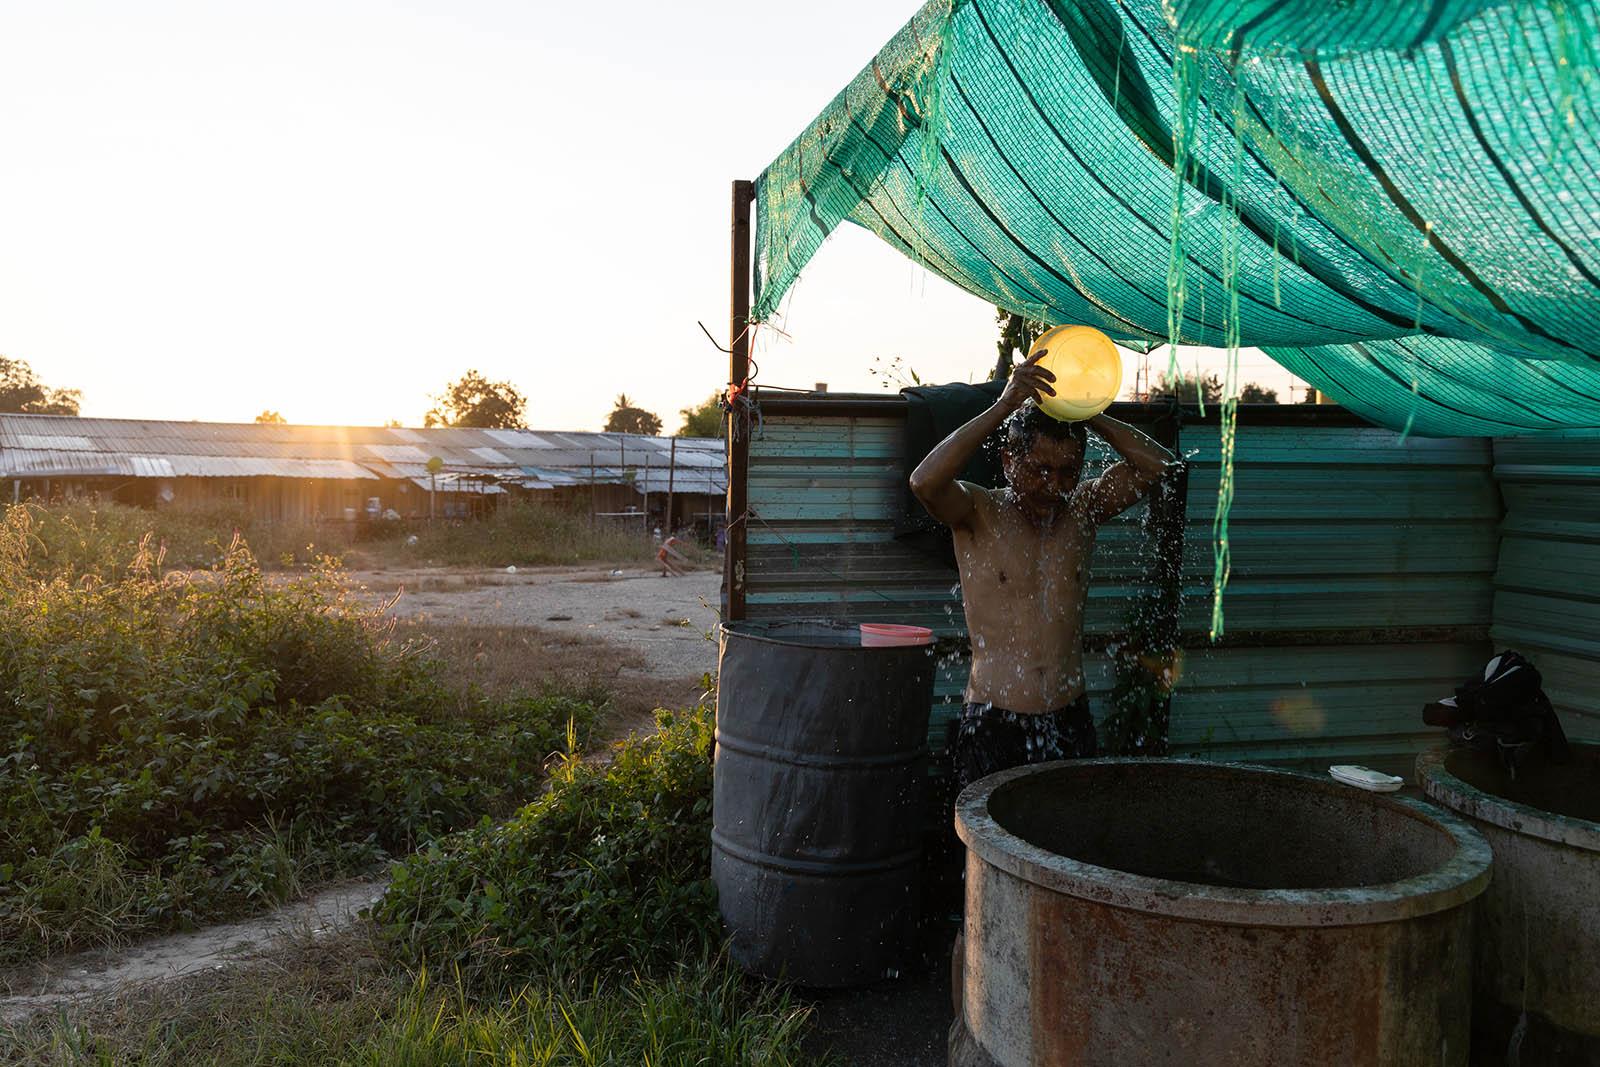 LIFE ON THE OTHER SIDE - Chiang Rai - A migrant worker from Myanmar takes a shower...